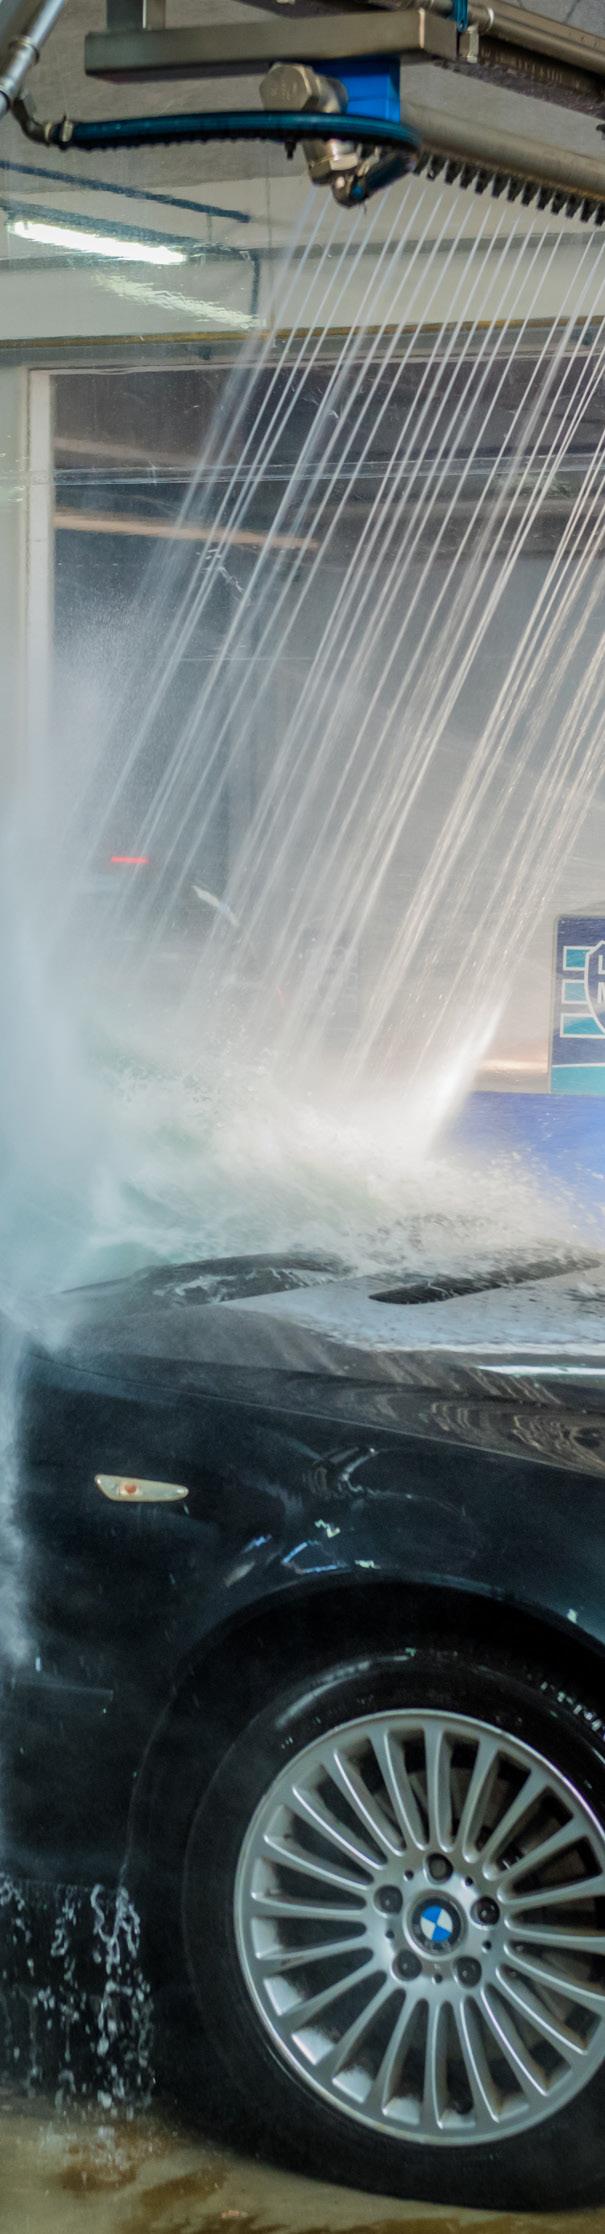 One of the biggest areas of opportunity for car wash owners and operators in Europe is speaking to the environmentallyfriendly practices of their business.